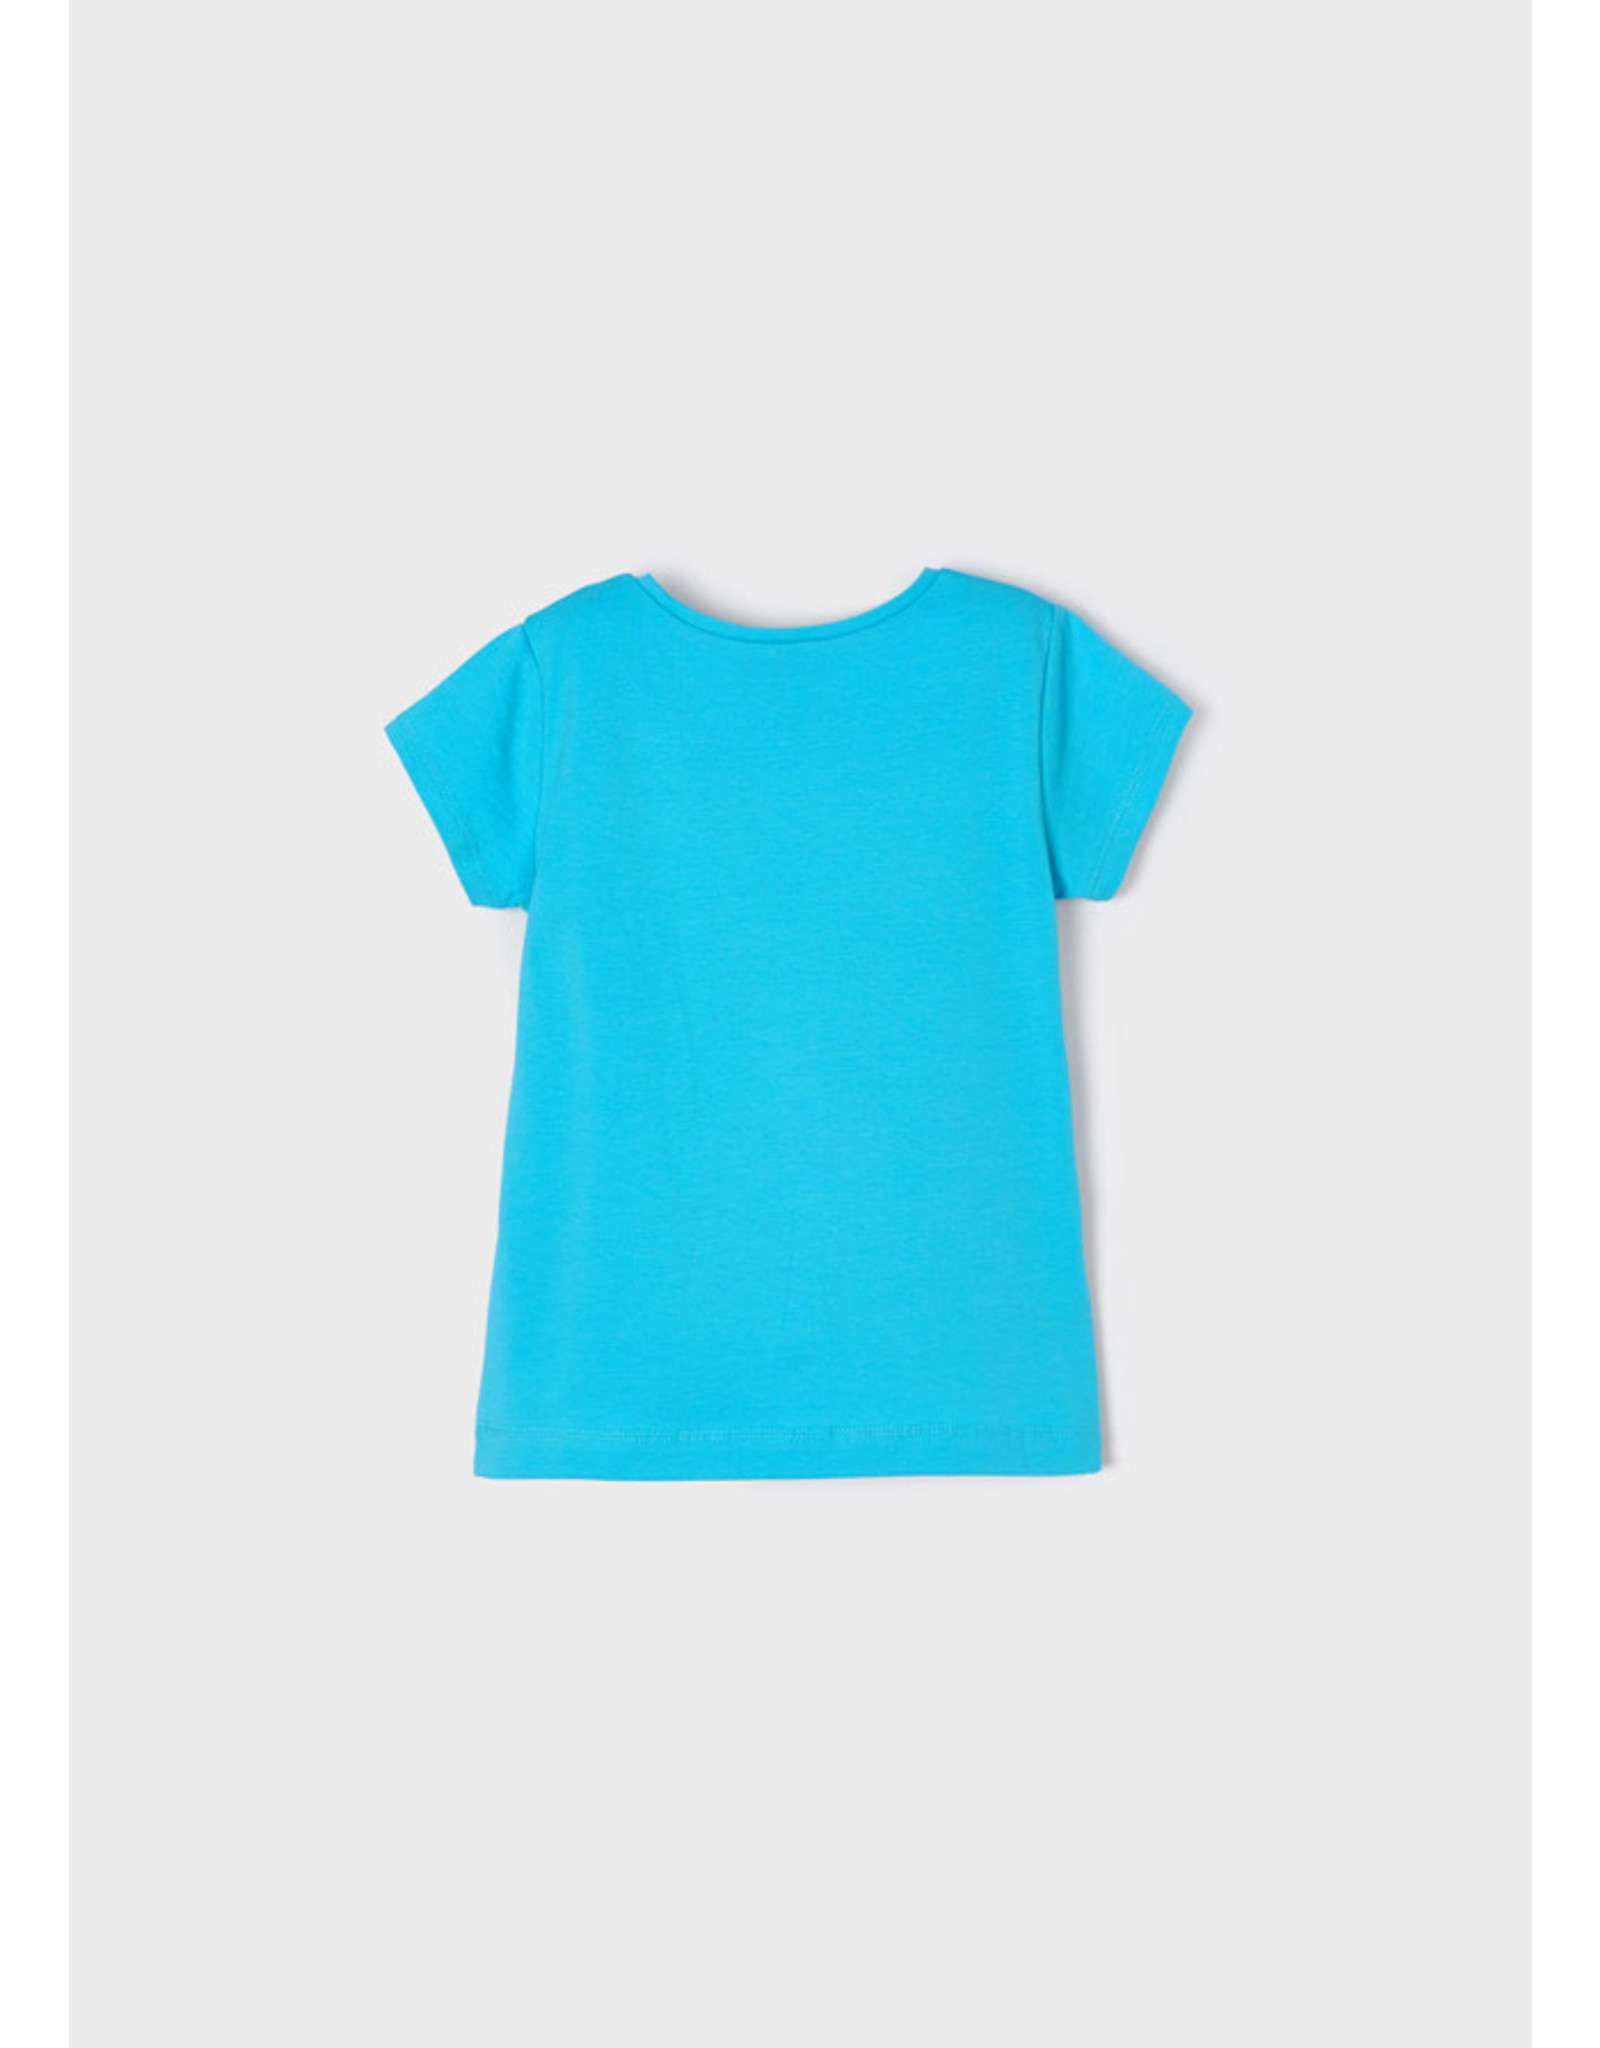 Mayoral Turquoise Kitty T-Shirt